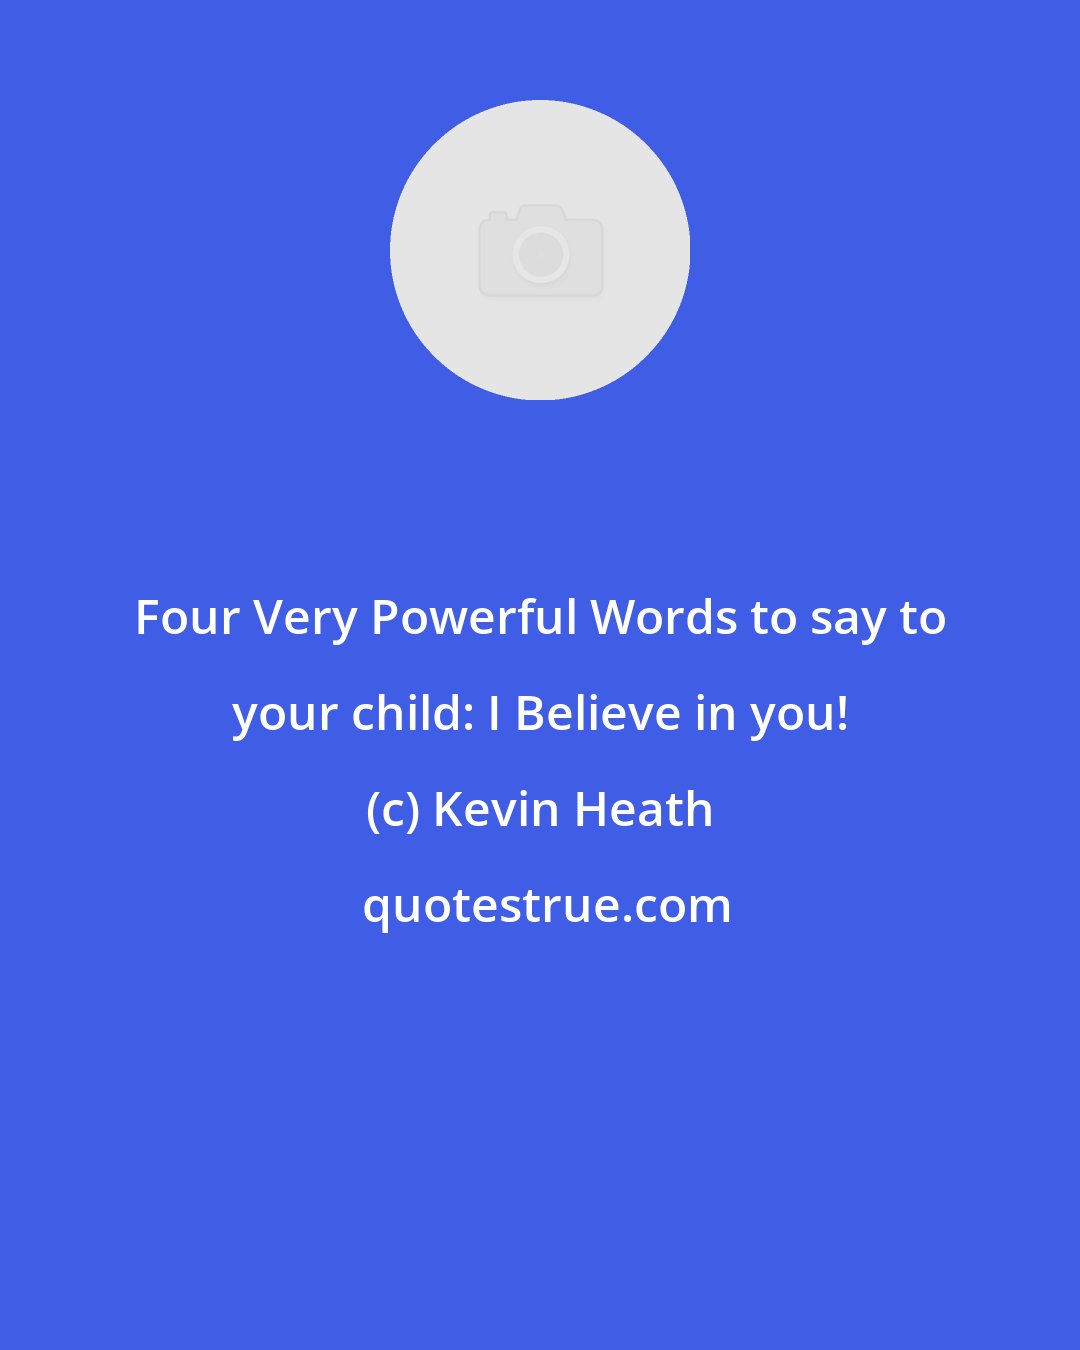 Kevin Heath: Four Very Powerful Words to say to your child: I Believe in you!